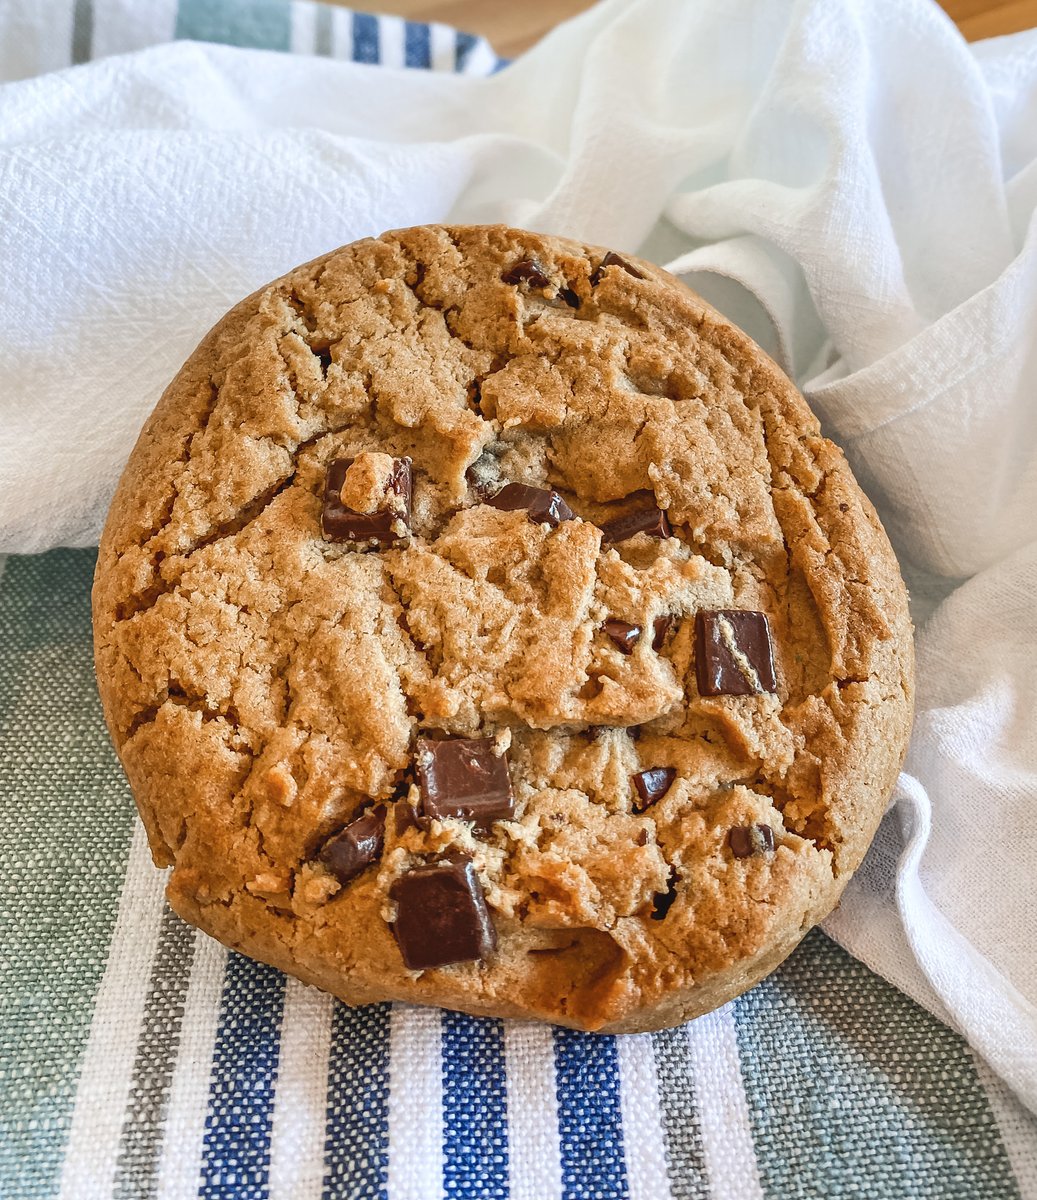 Happy #NationalChocolateChipDay 🎉

Celebrate with us & our delicious chocolate chip filled desserts 🍪

#AlessiBakery #ChocolateChip #Cookies #CookieCake #TampaBay